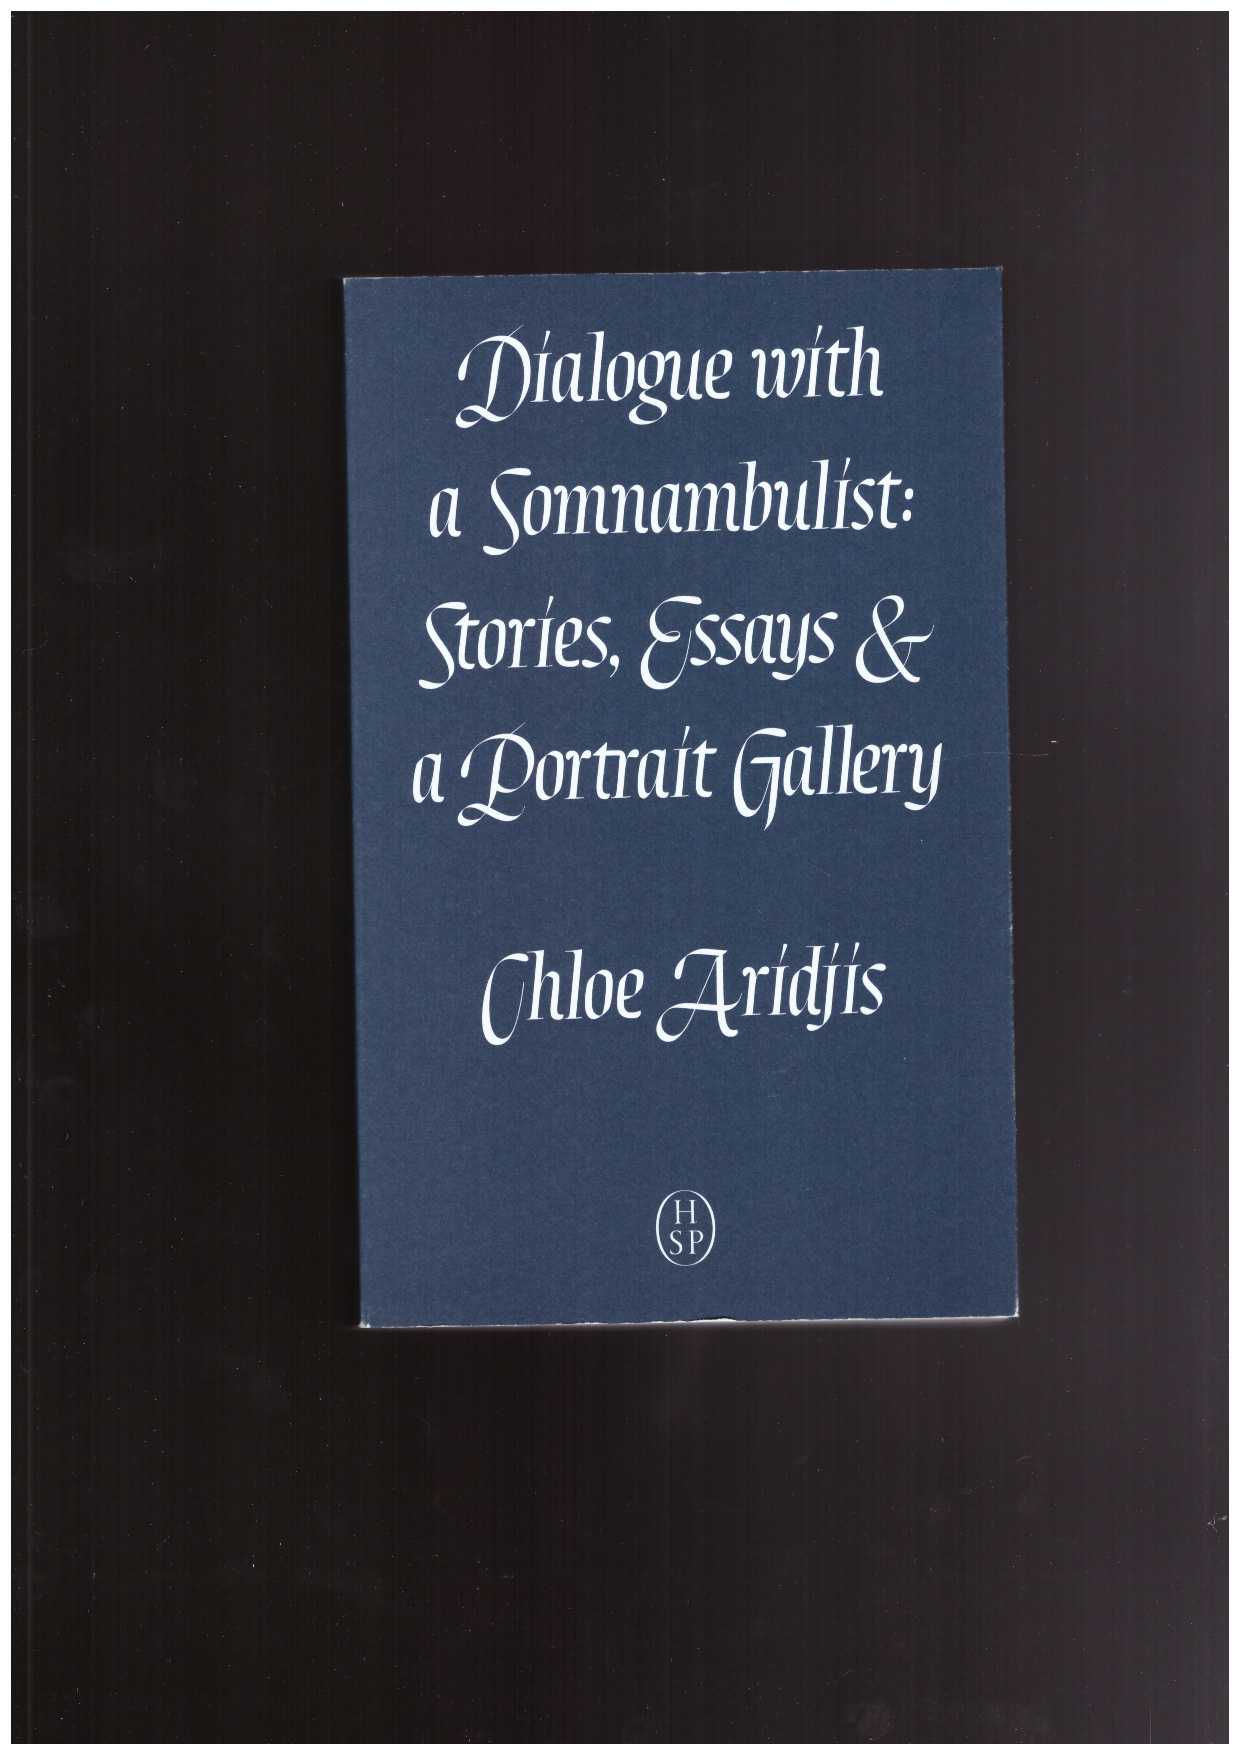 ARIDJIS, Chloe - Dialogue with a Somnambulist. Stories, Essays & a Portrait Gallery